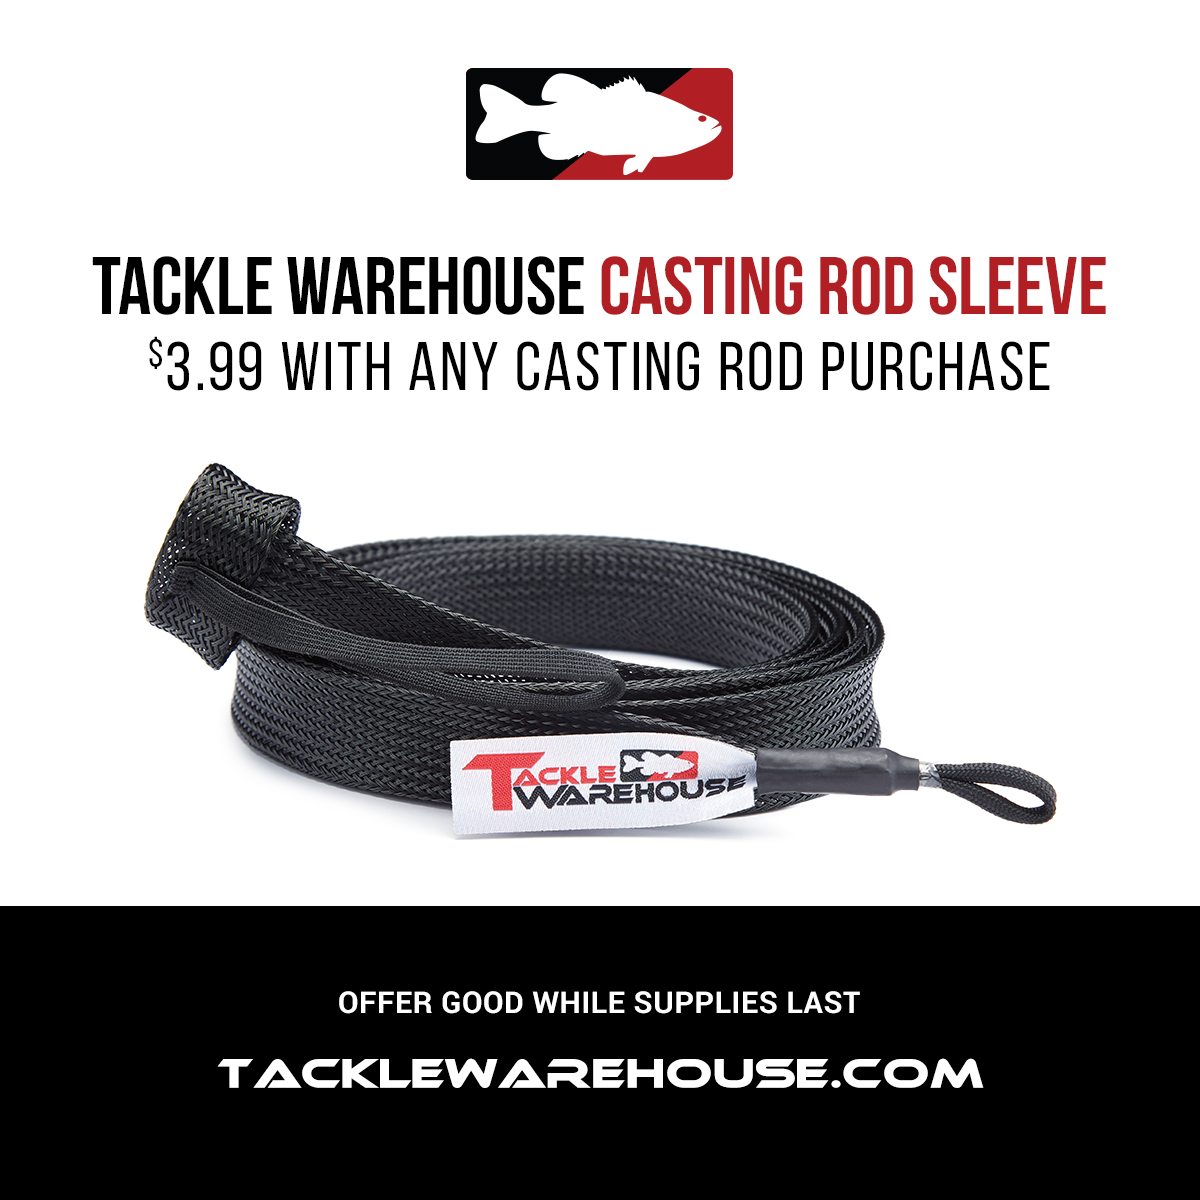 Tackle Warehouse Casting Rod Sleeve $3.99 With Any Casting Rod Purchase